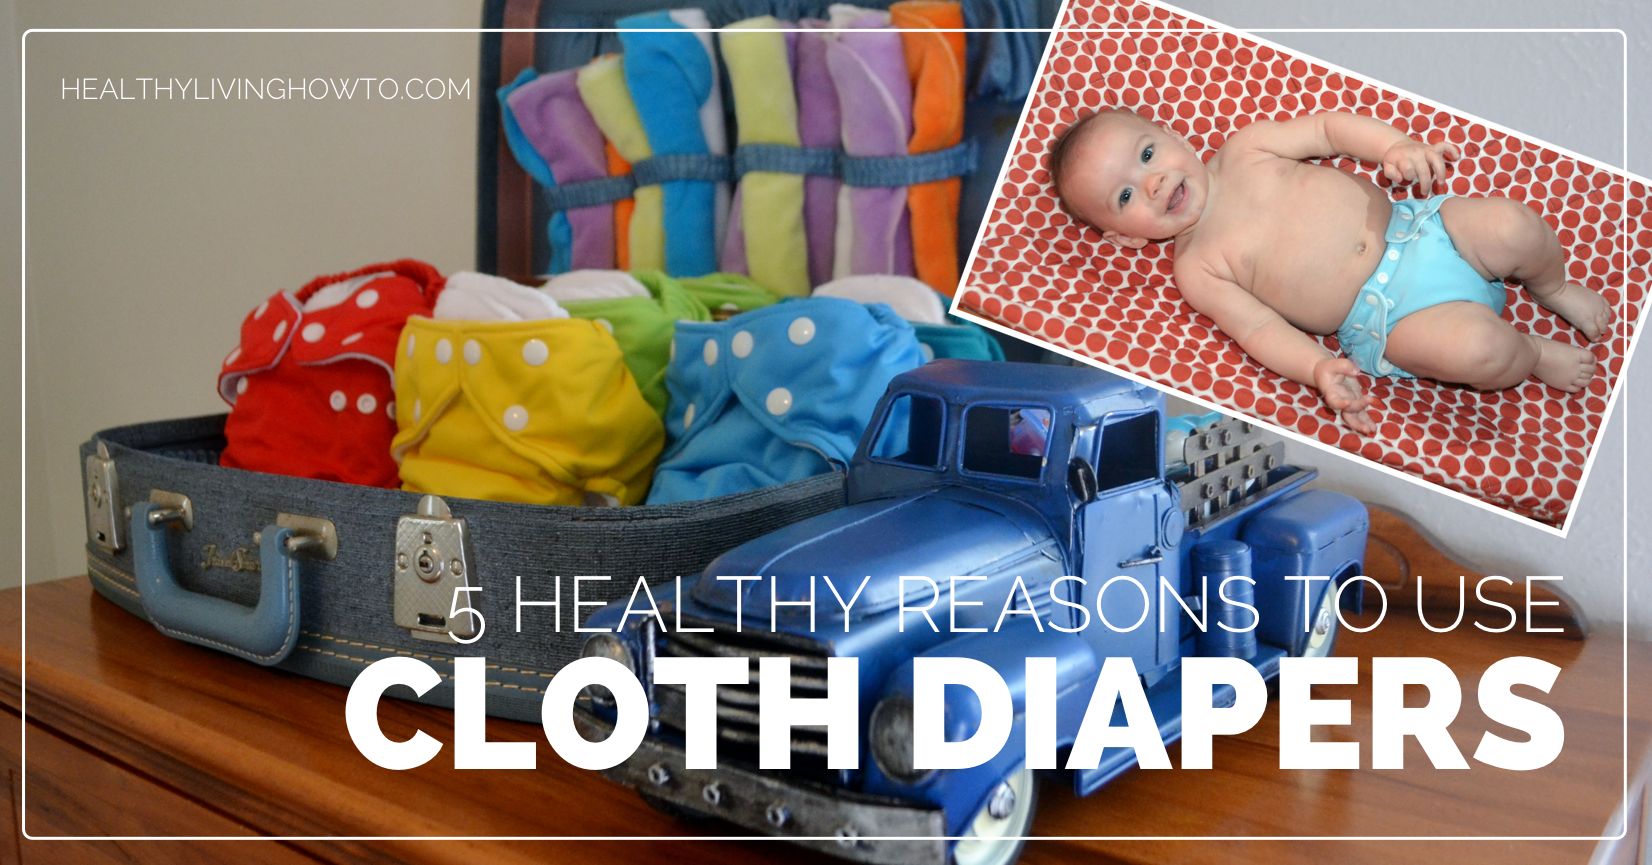 5 Healthy Reasons To Use Cloth Diapers | healthylivinghowto.com